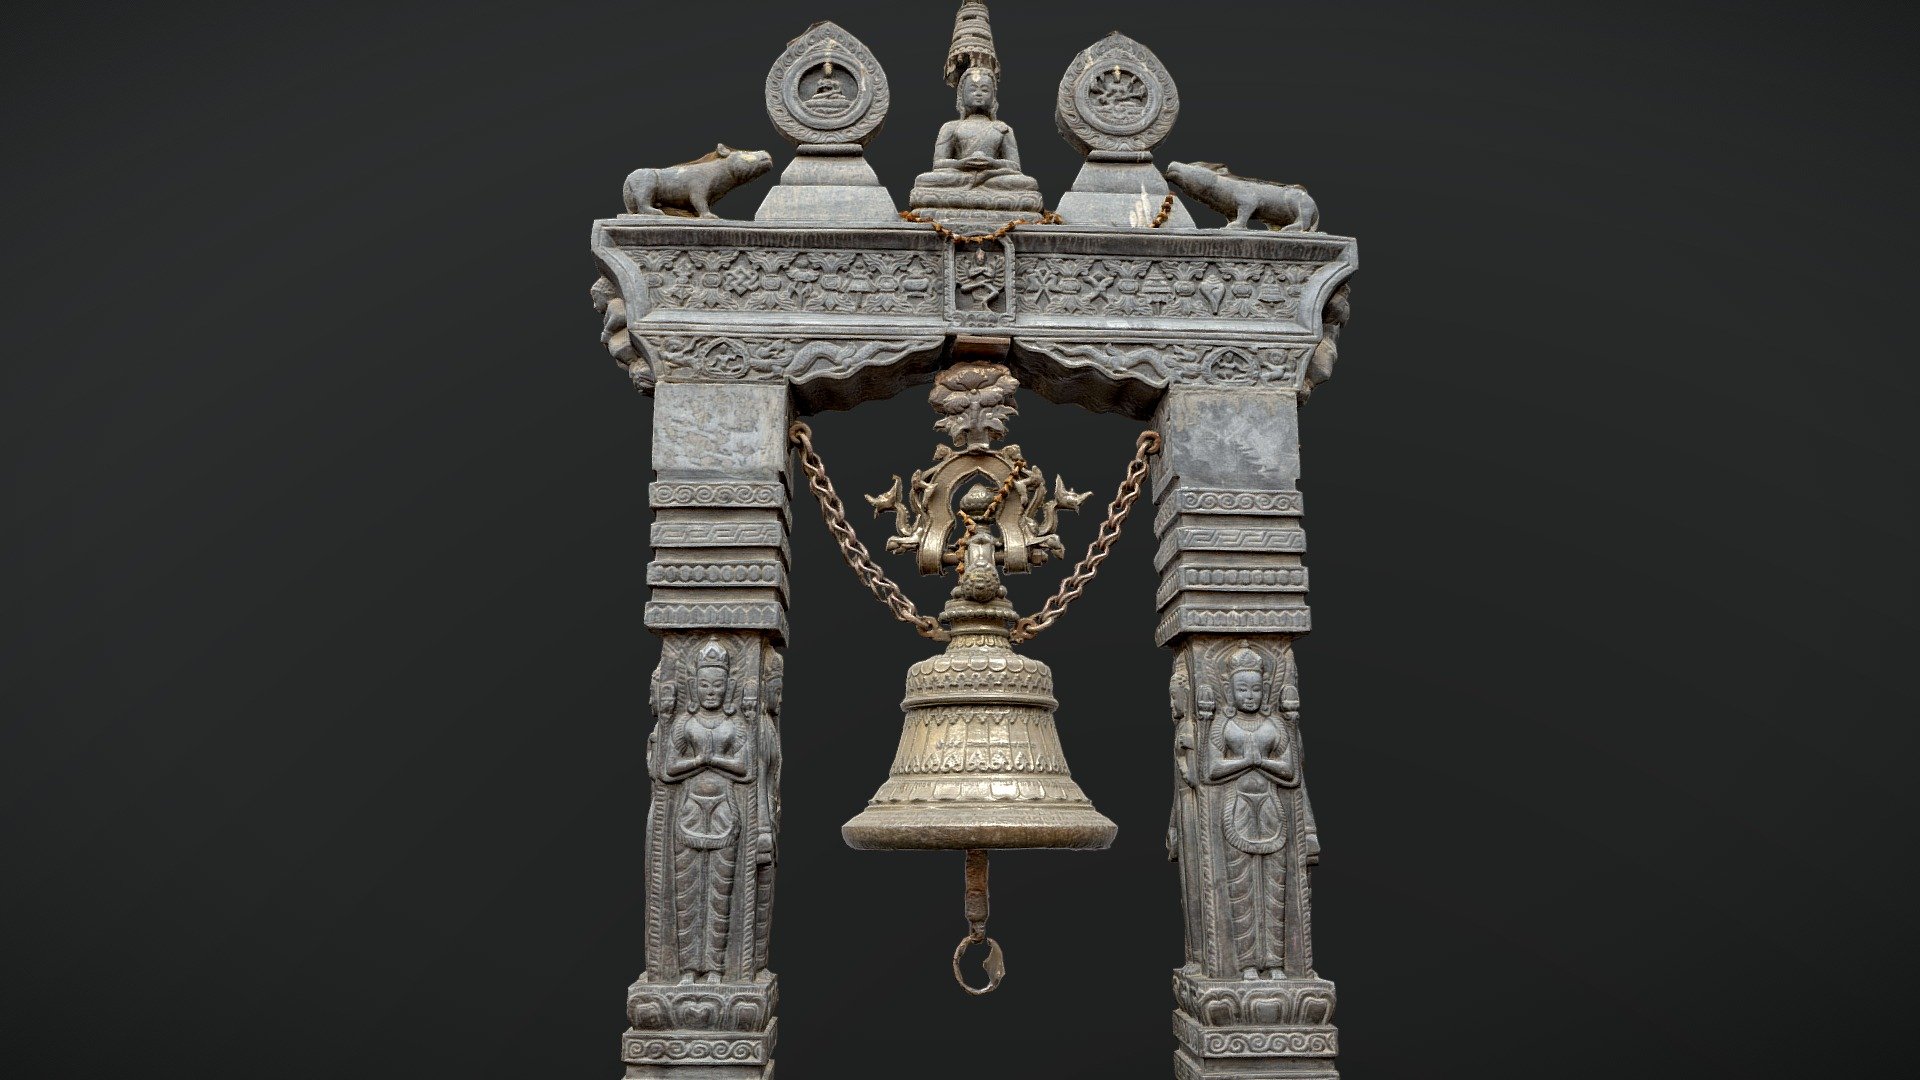 This ancient and traditional bell is located inside premises of &ldquo;Jesthavarna Mahvihar